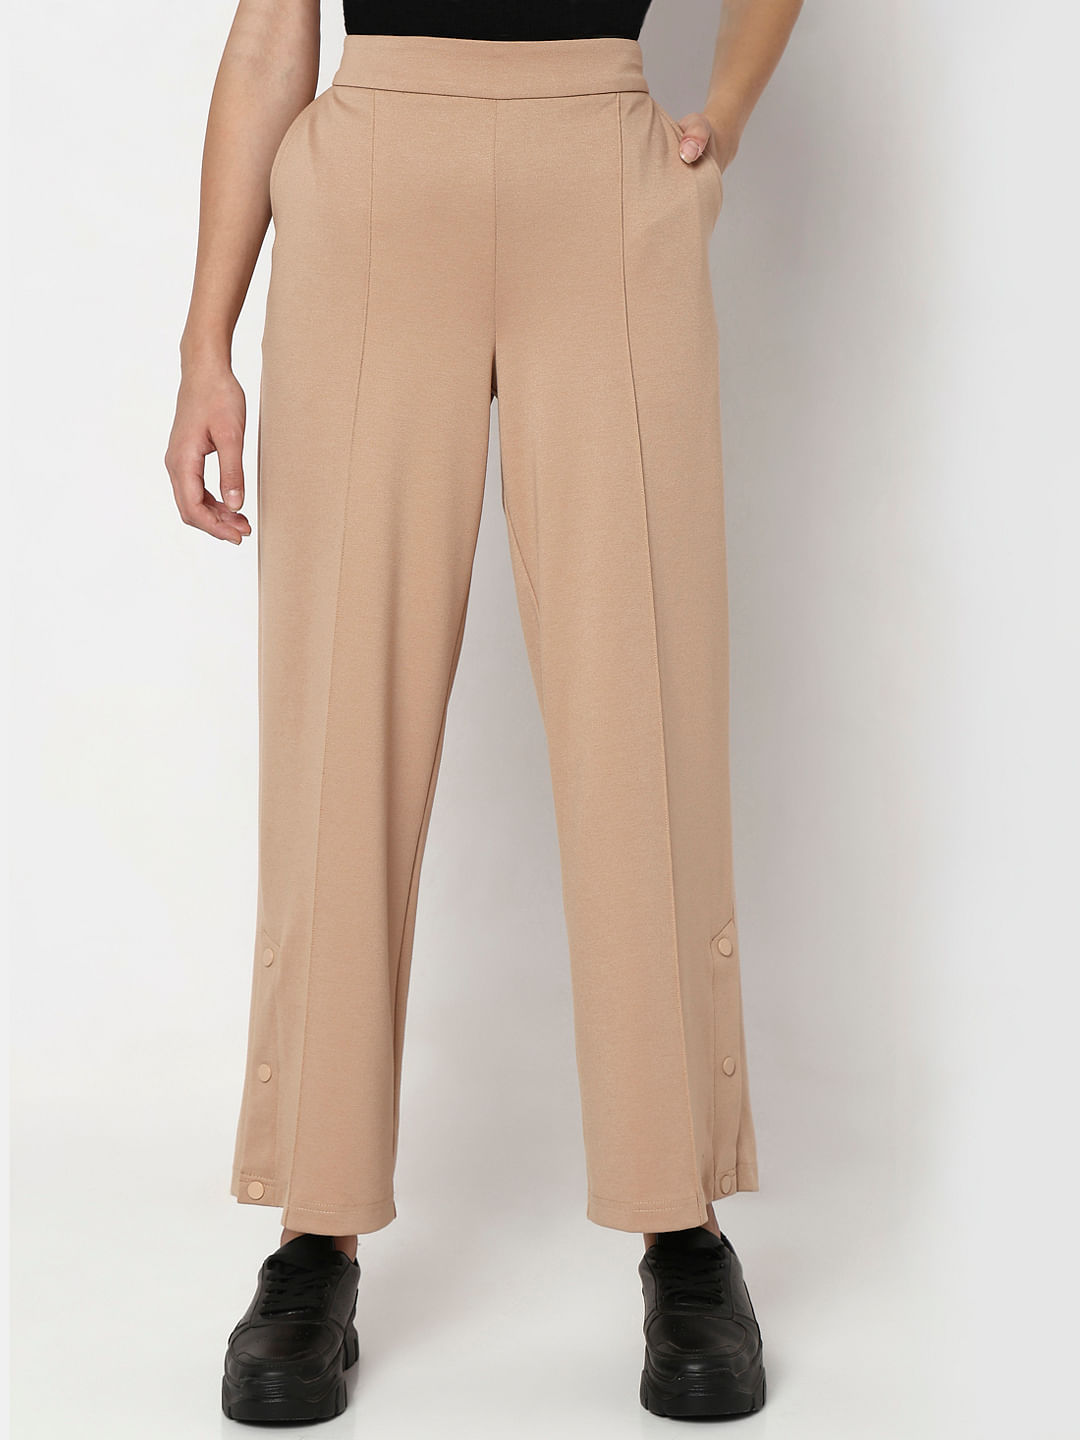 23 WideLeg Trousers to Wear With Every Summer Outfit  Who What Wear